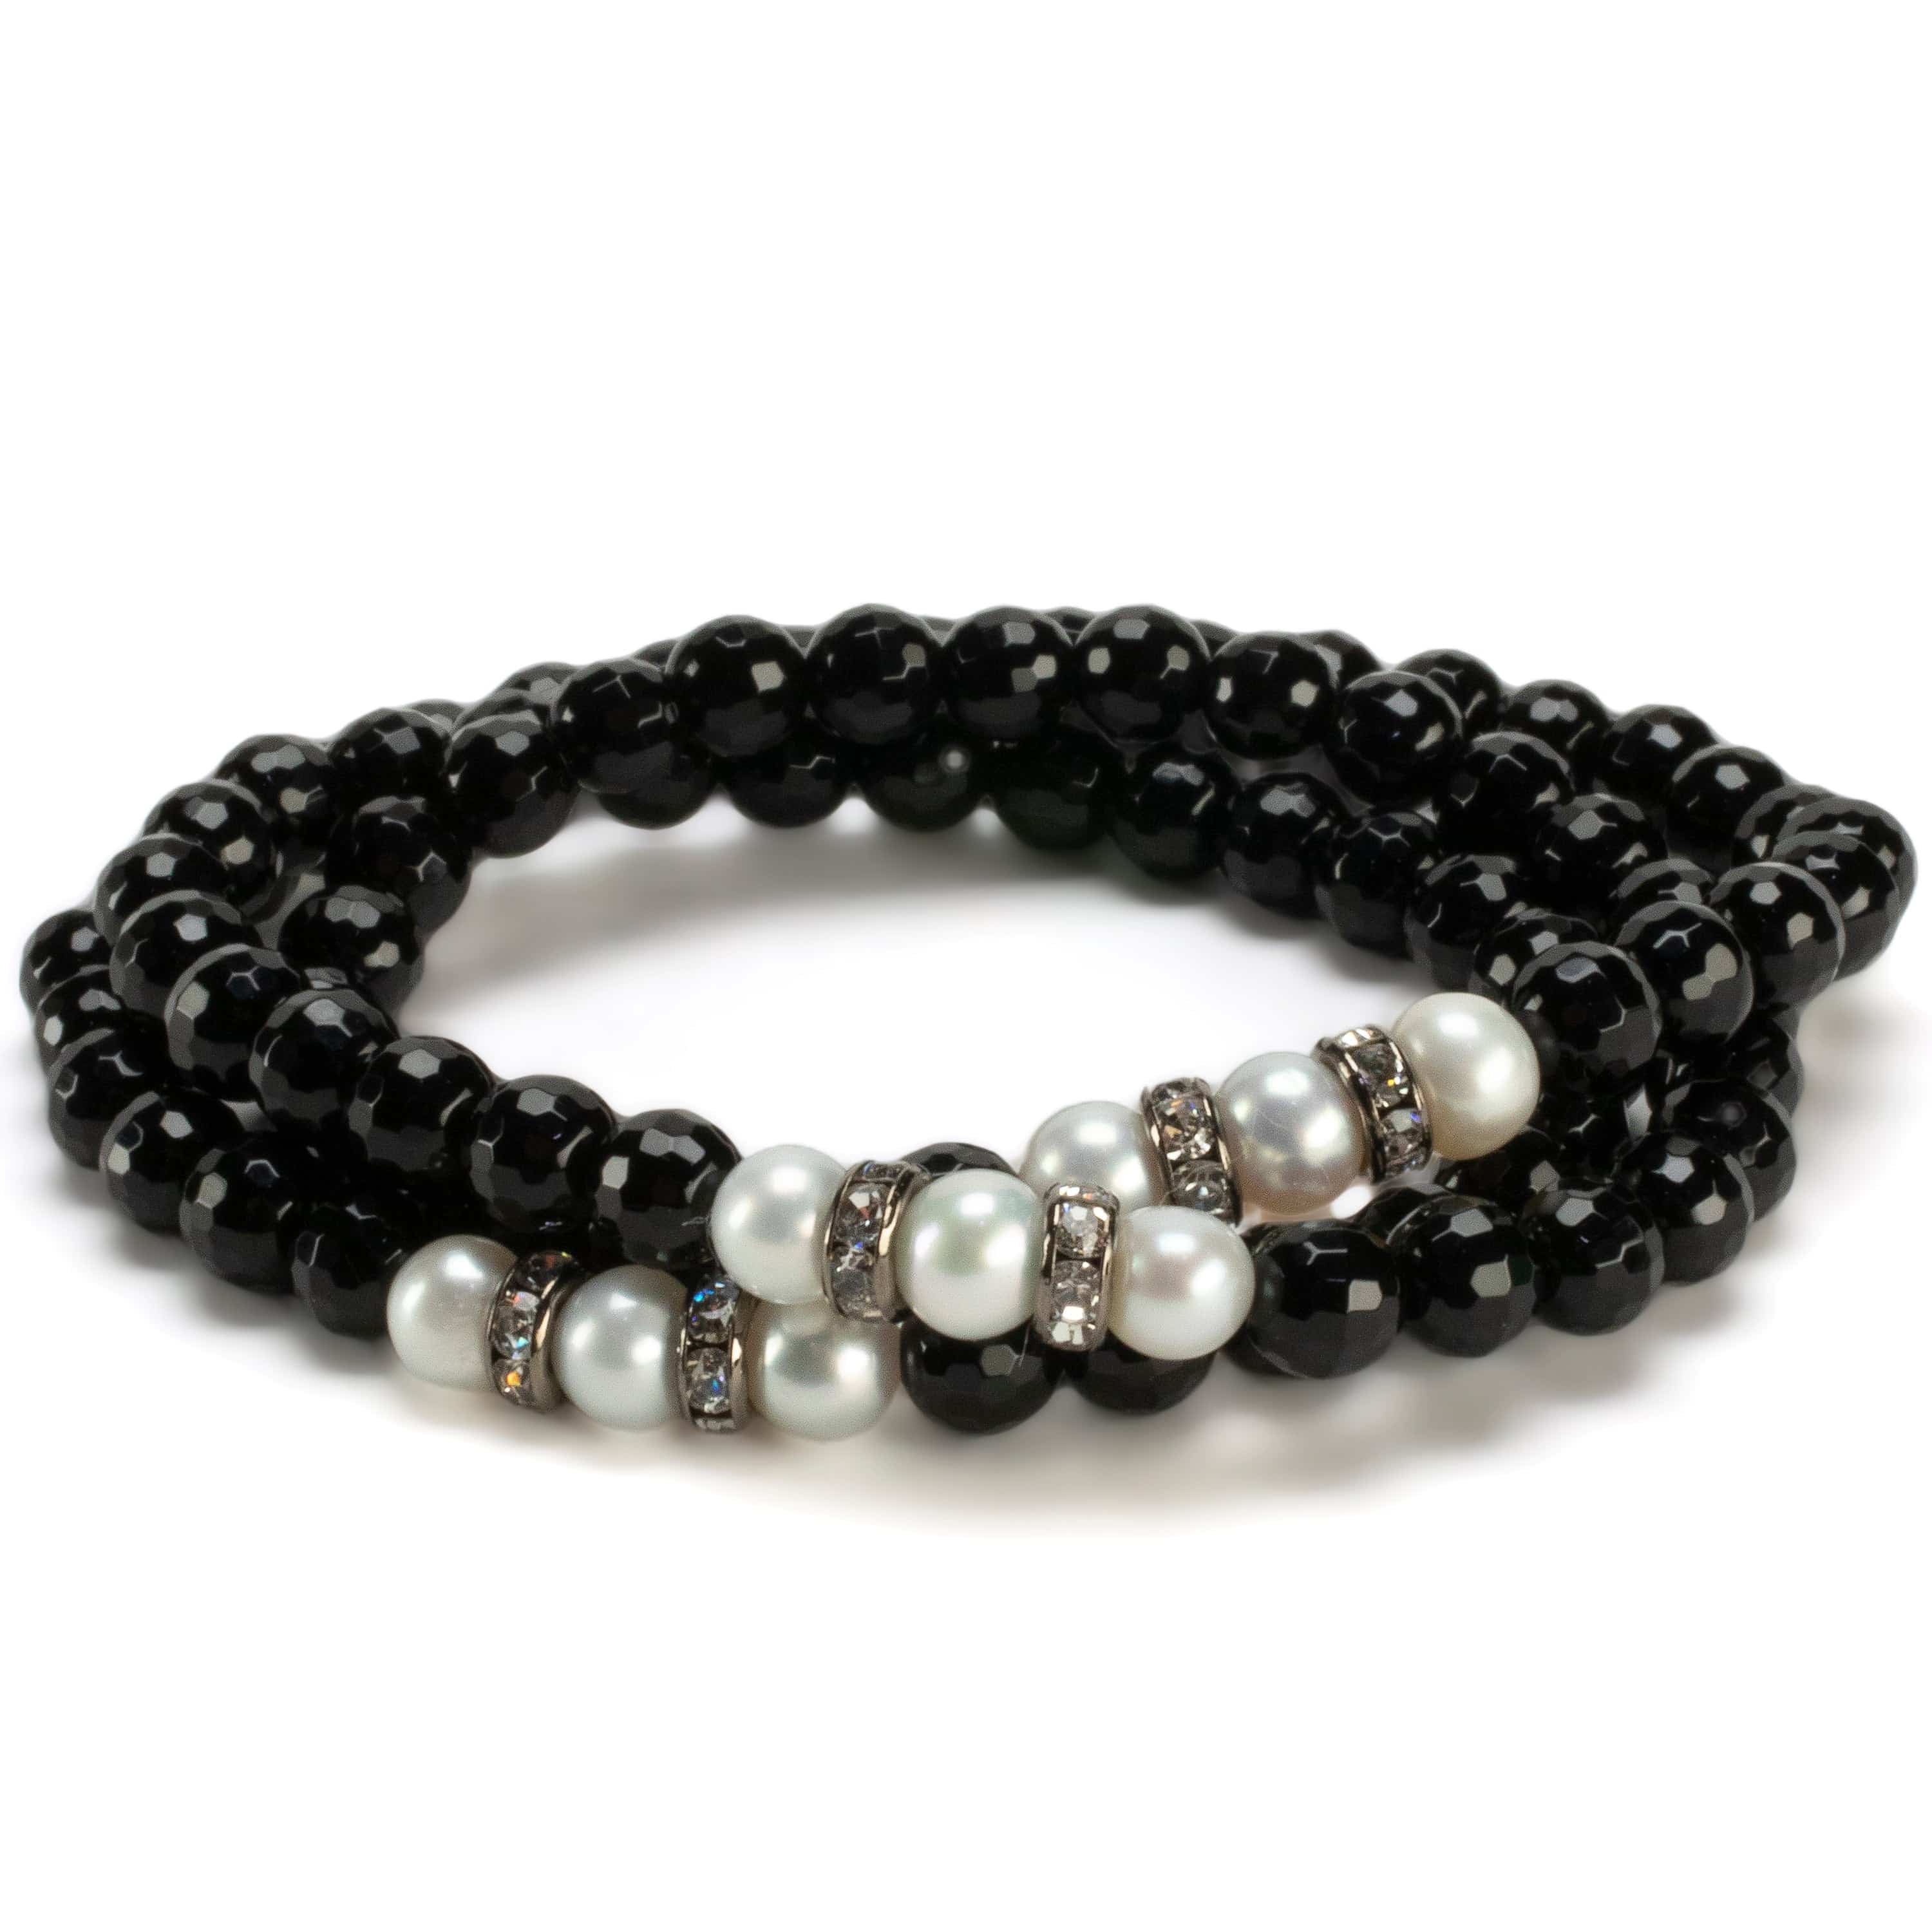 Kalifano Gemstone Bracelets Faceted Black Agate 6mm Beads with Pearl & Silver Accent Beads Triple Wrap Elastic Gemstone Bracelet WHITE-BGI3-072